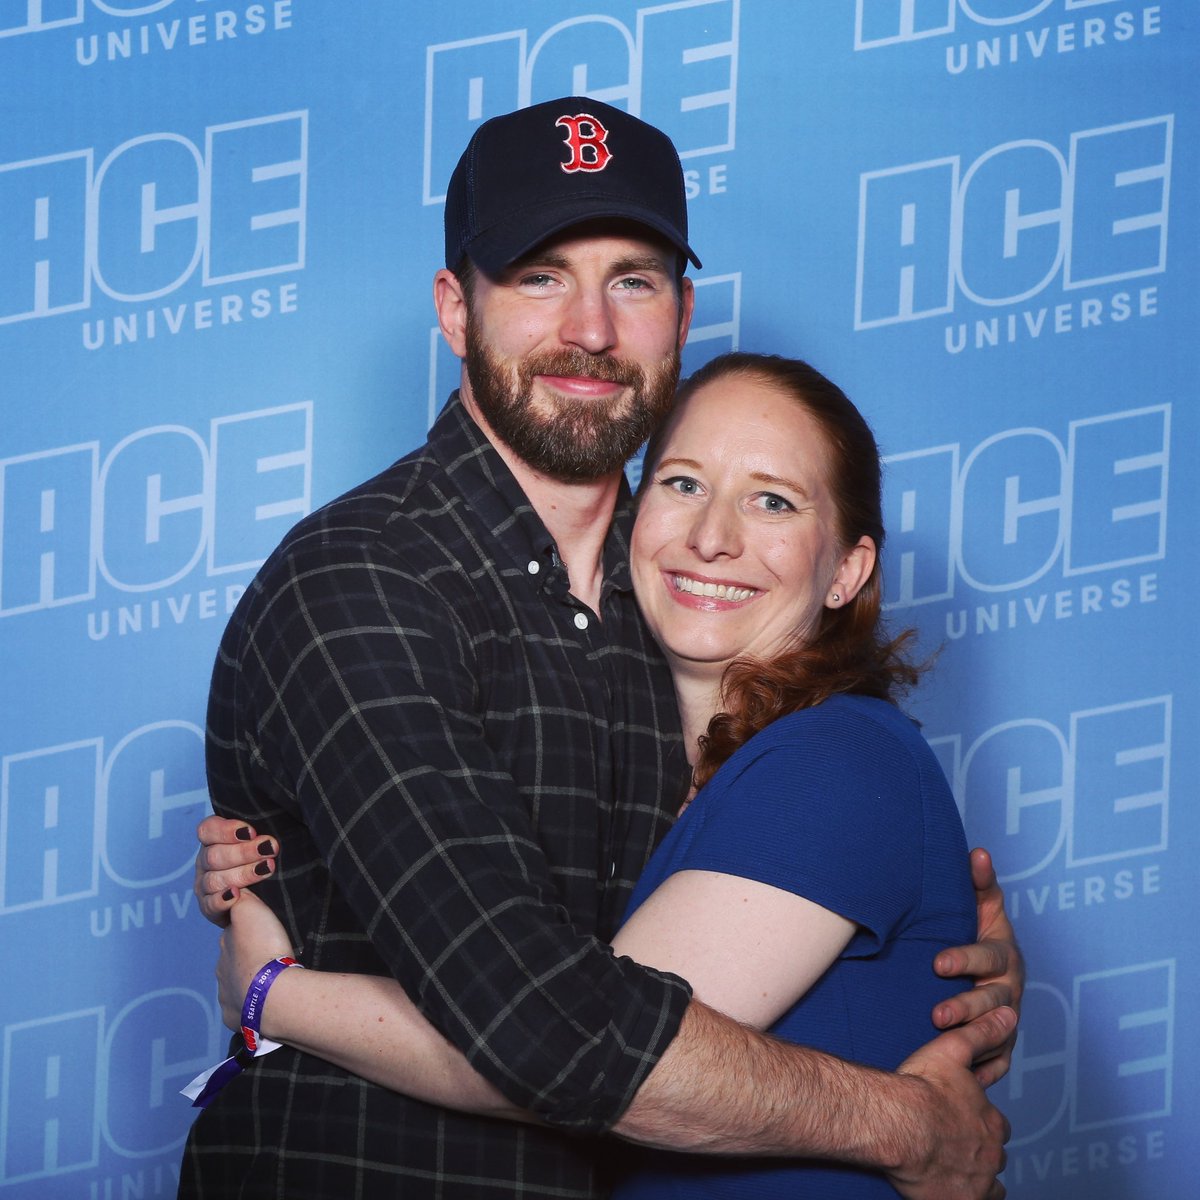 I got two more non-SPN ops this year with  @ChrisEvans amd  @TaronEgerton - who are two of the sweetest guys on the planet! When I choose who to admire, I choose well! 